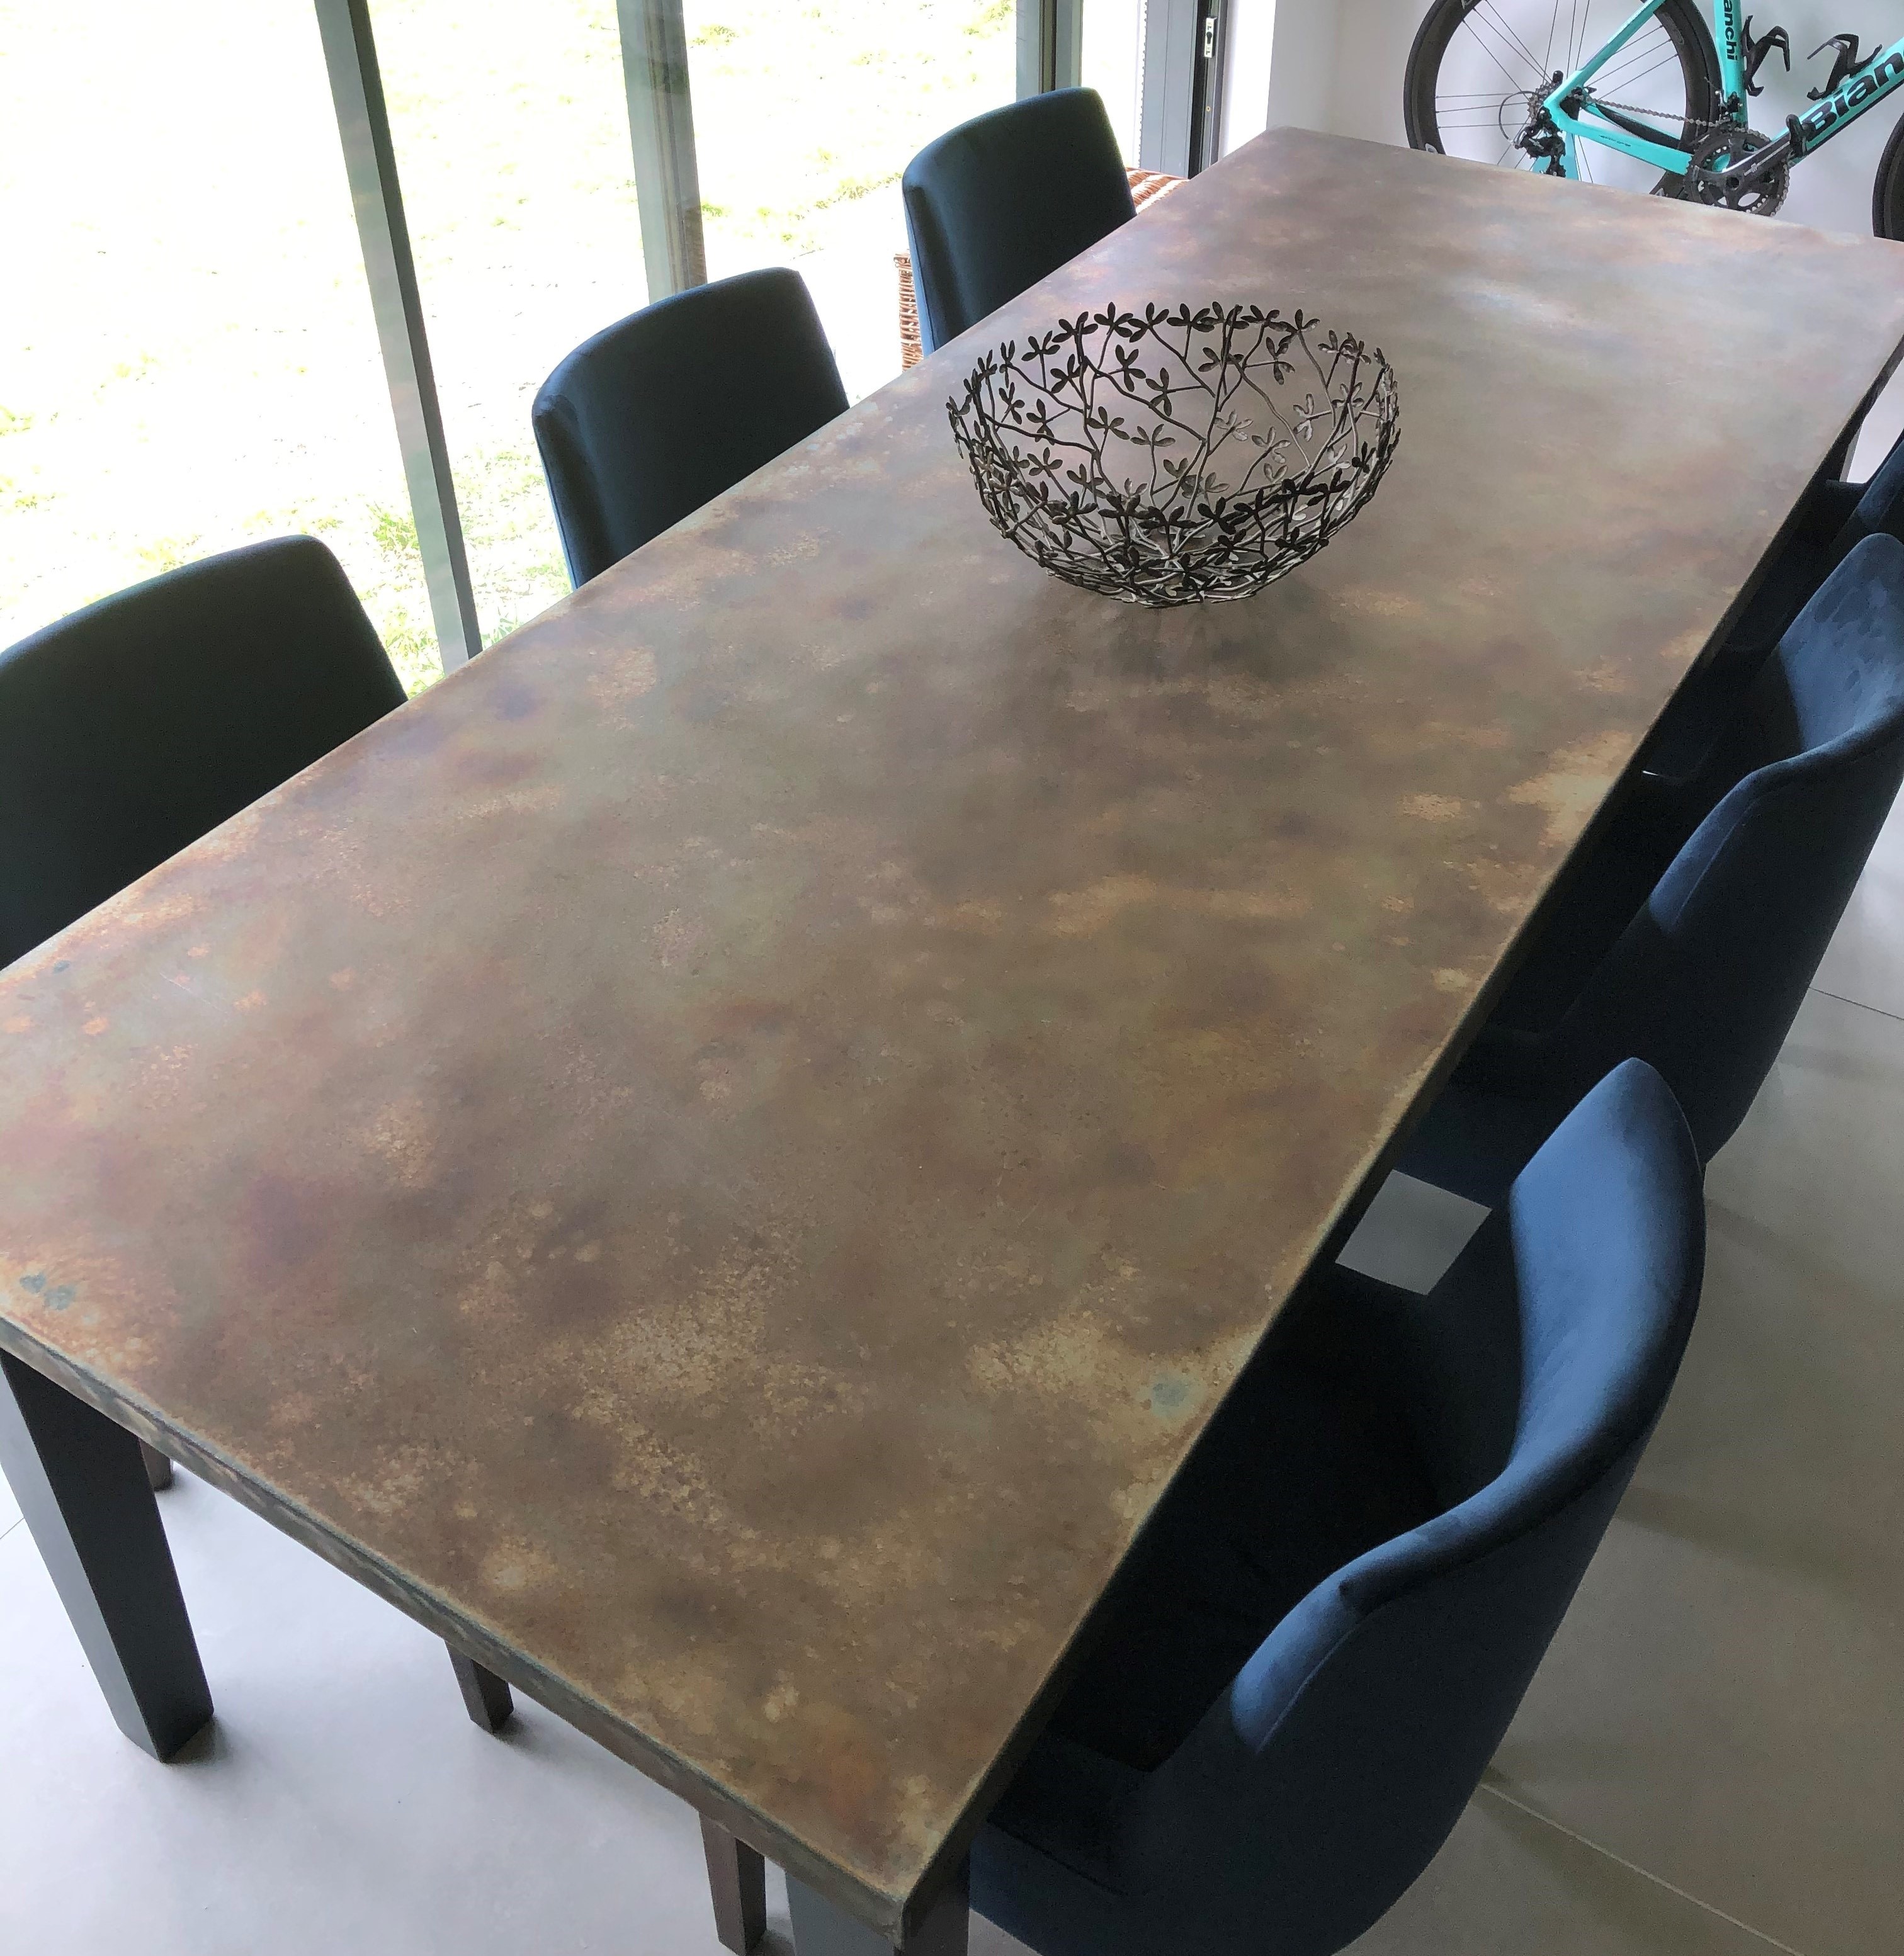 Bespoke zinc antique finish table made by hand at UKAA